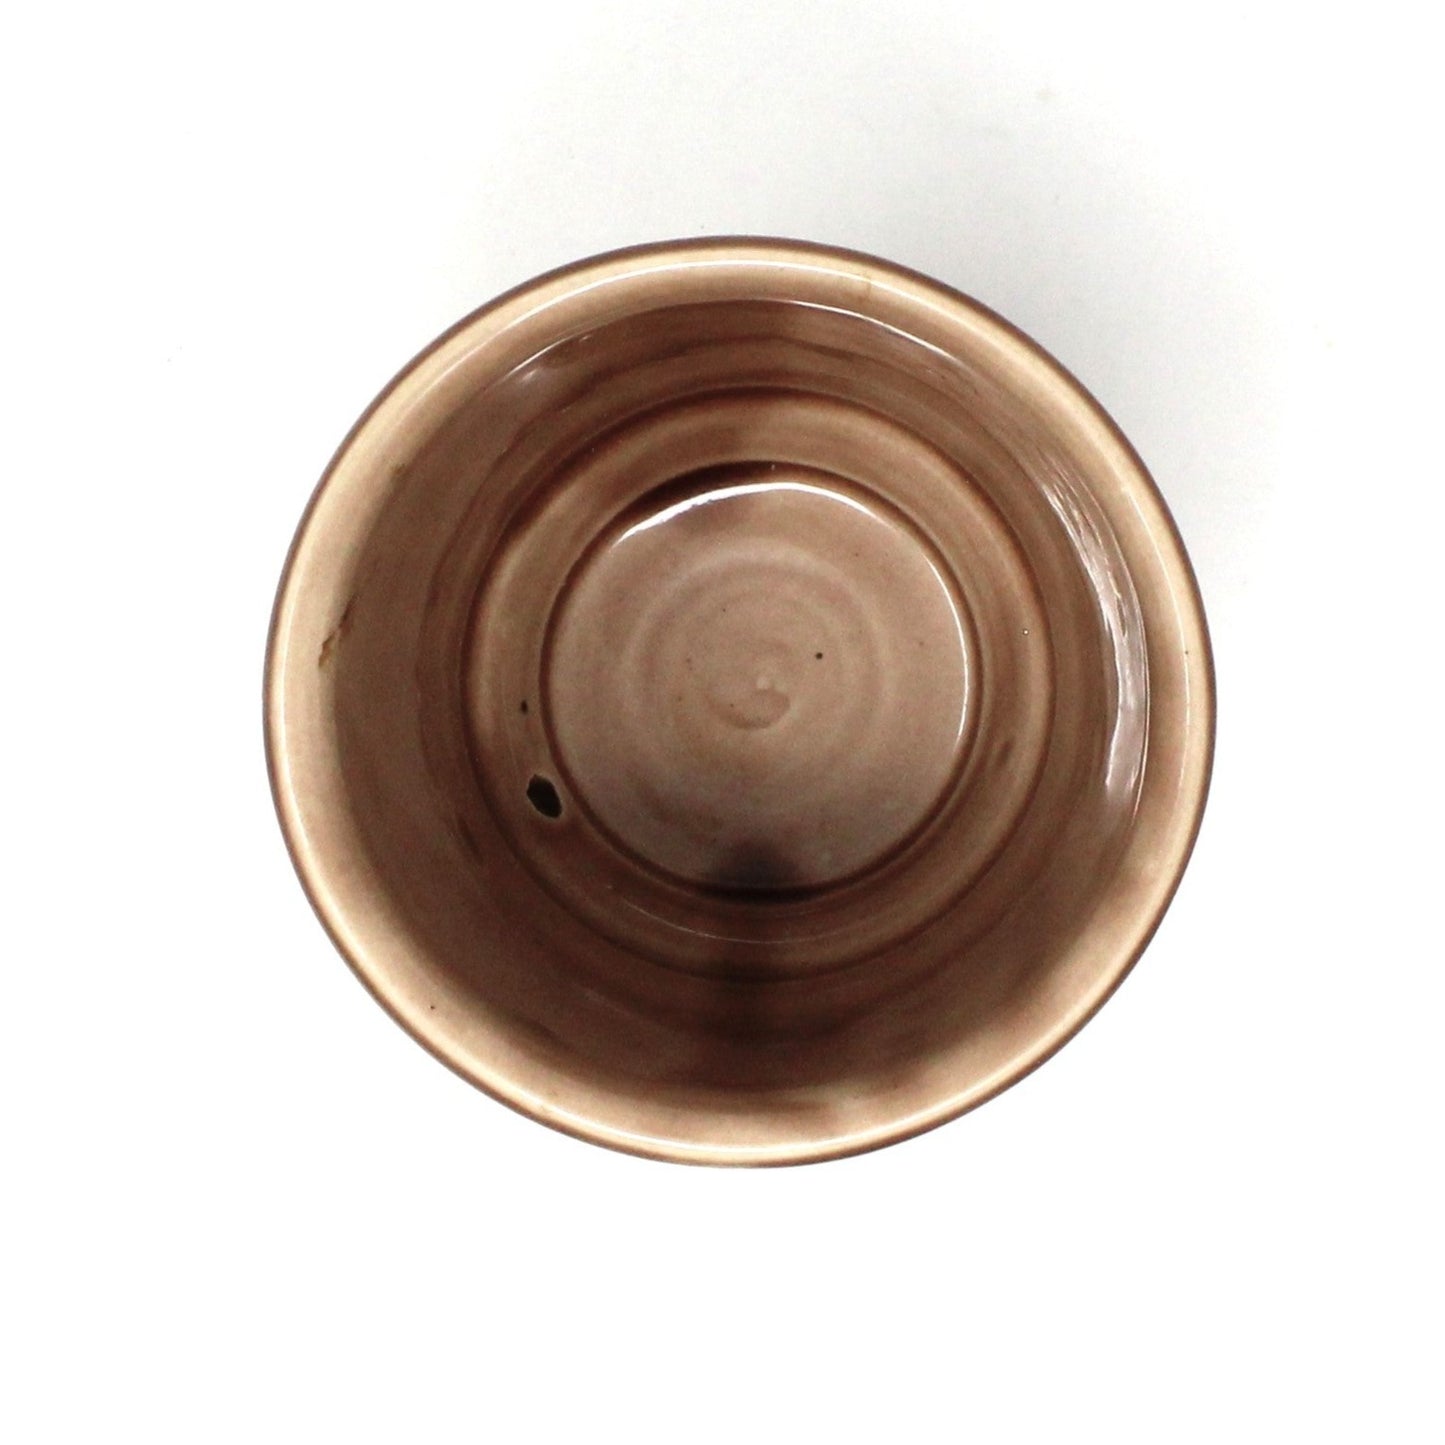 Planter, McCoy Pottery Bamboo with Attached Saucer, 0372 Tan / Brown, Vintage